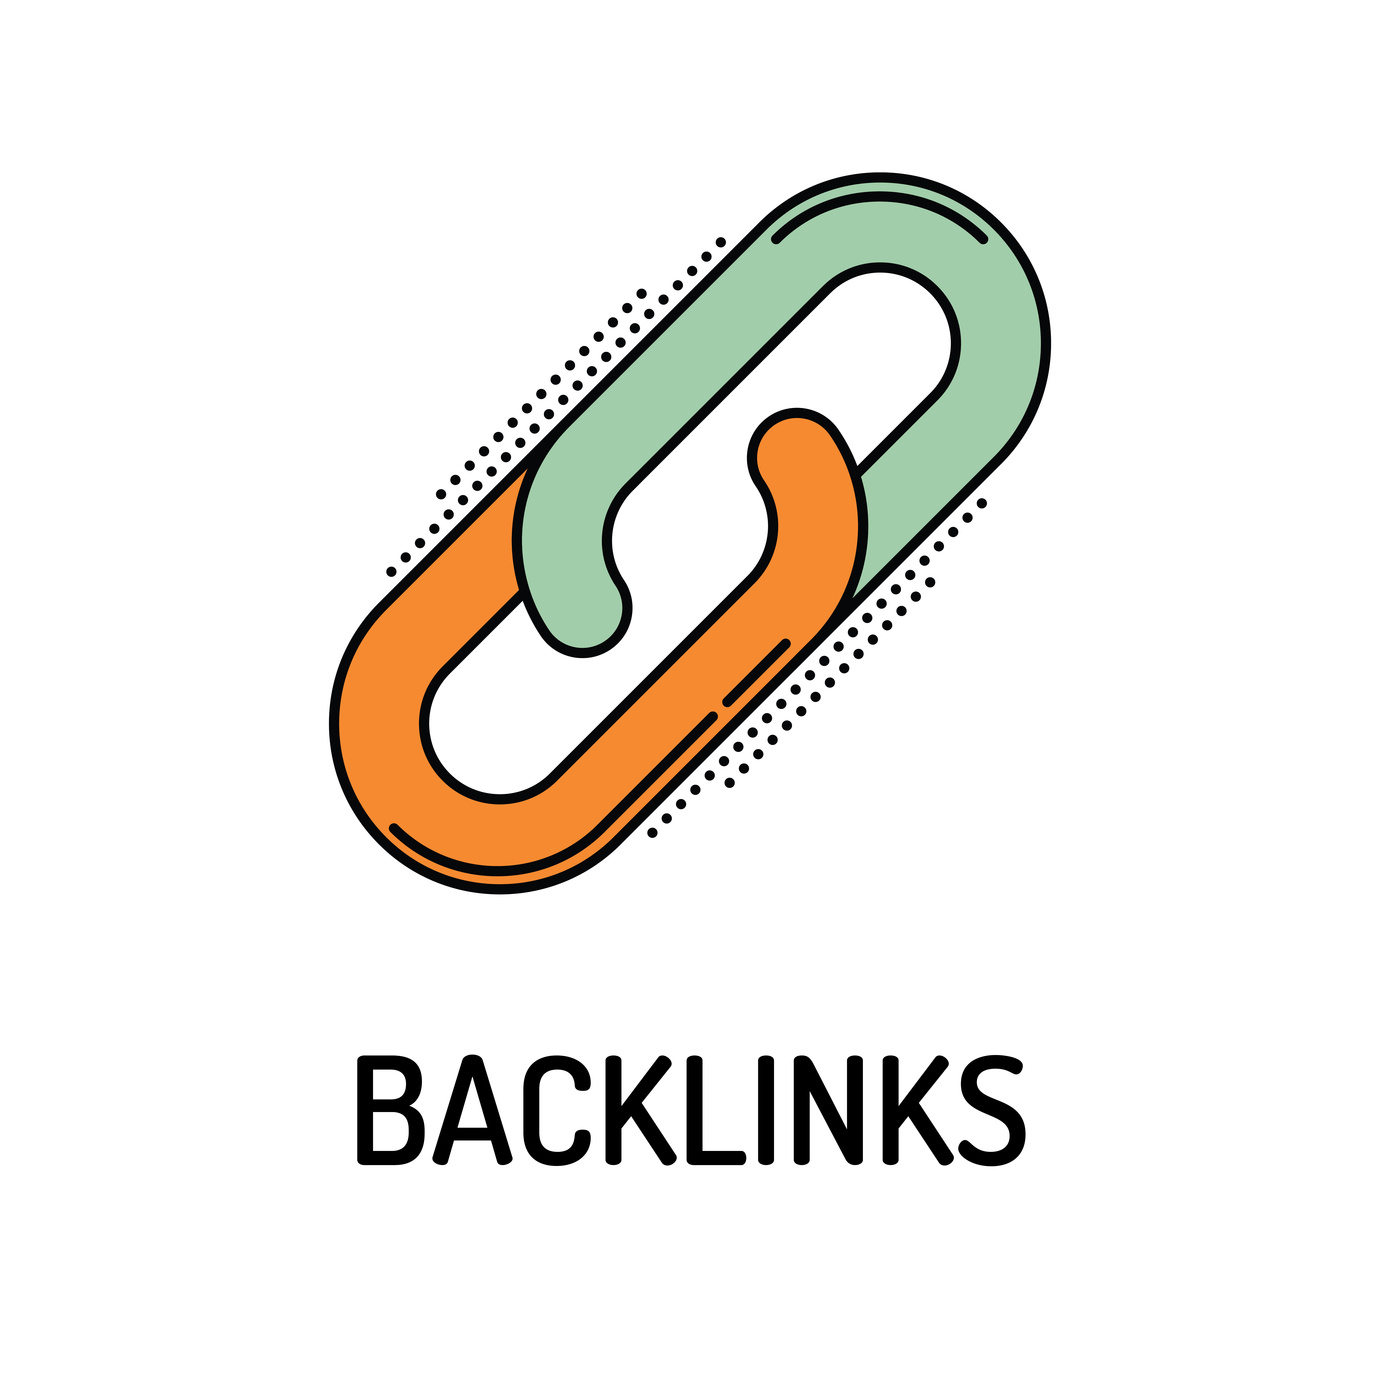 Will build you 20 DoFollow backlinks on unique domains! High Authority and TrustFlow